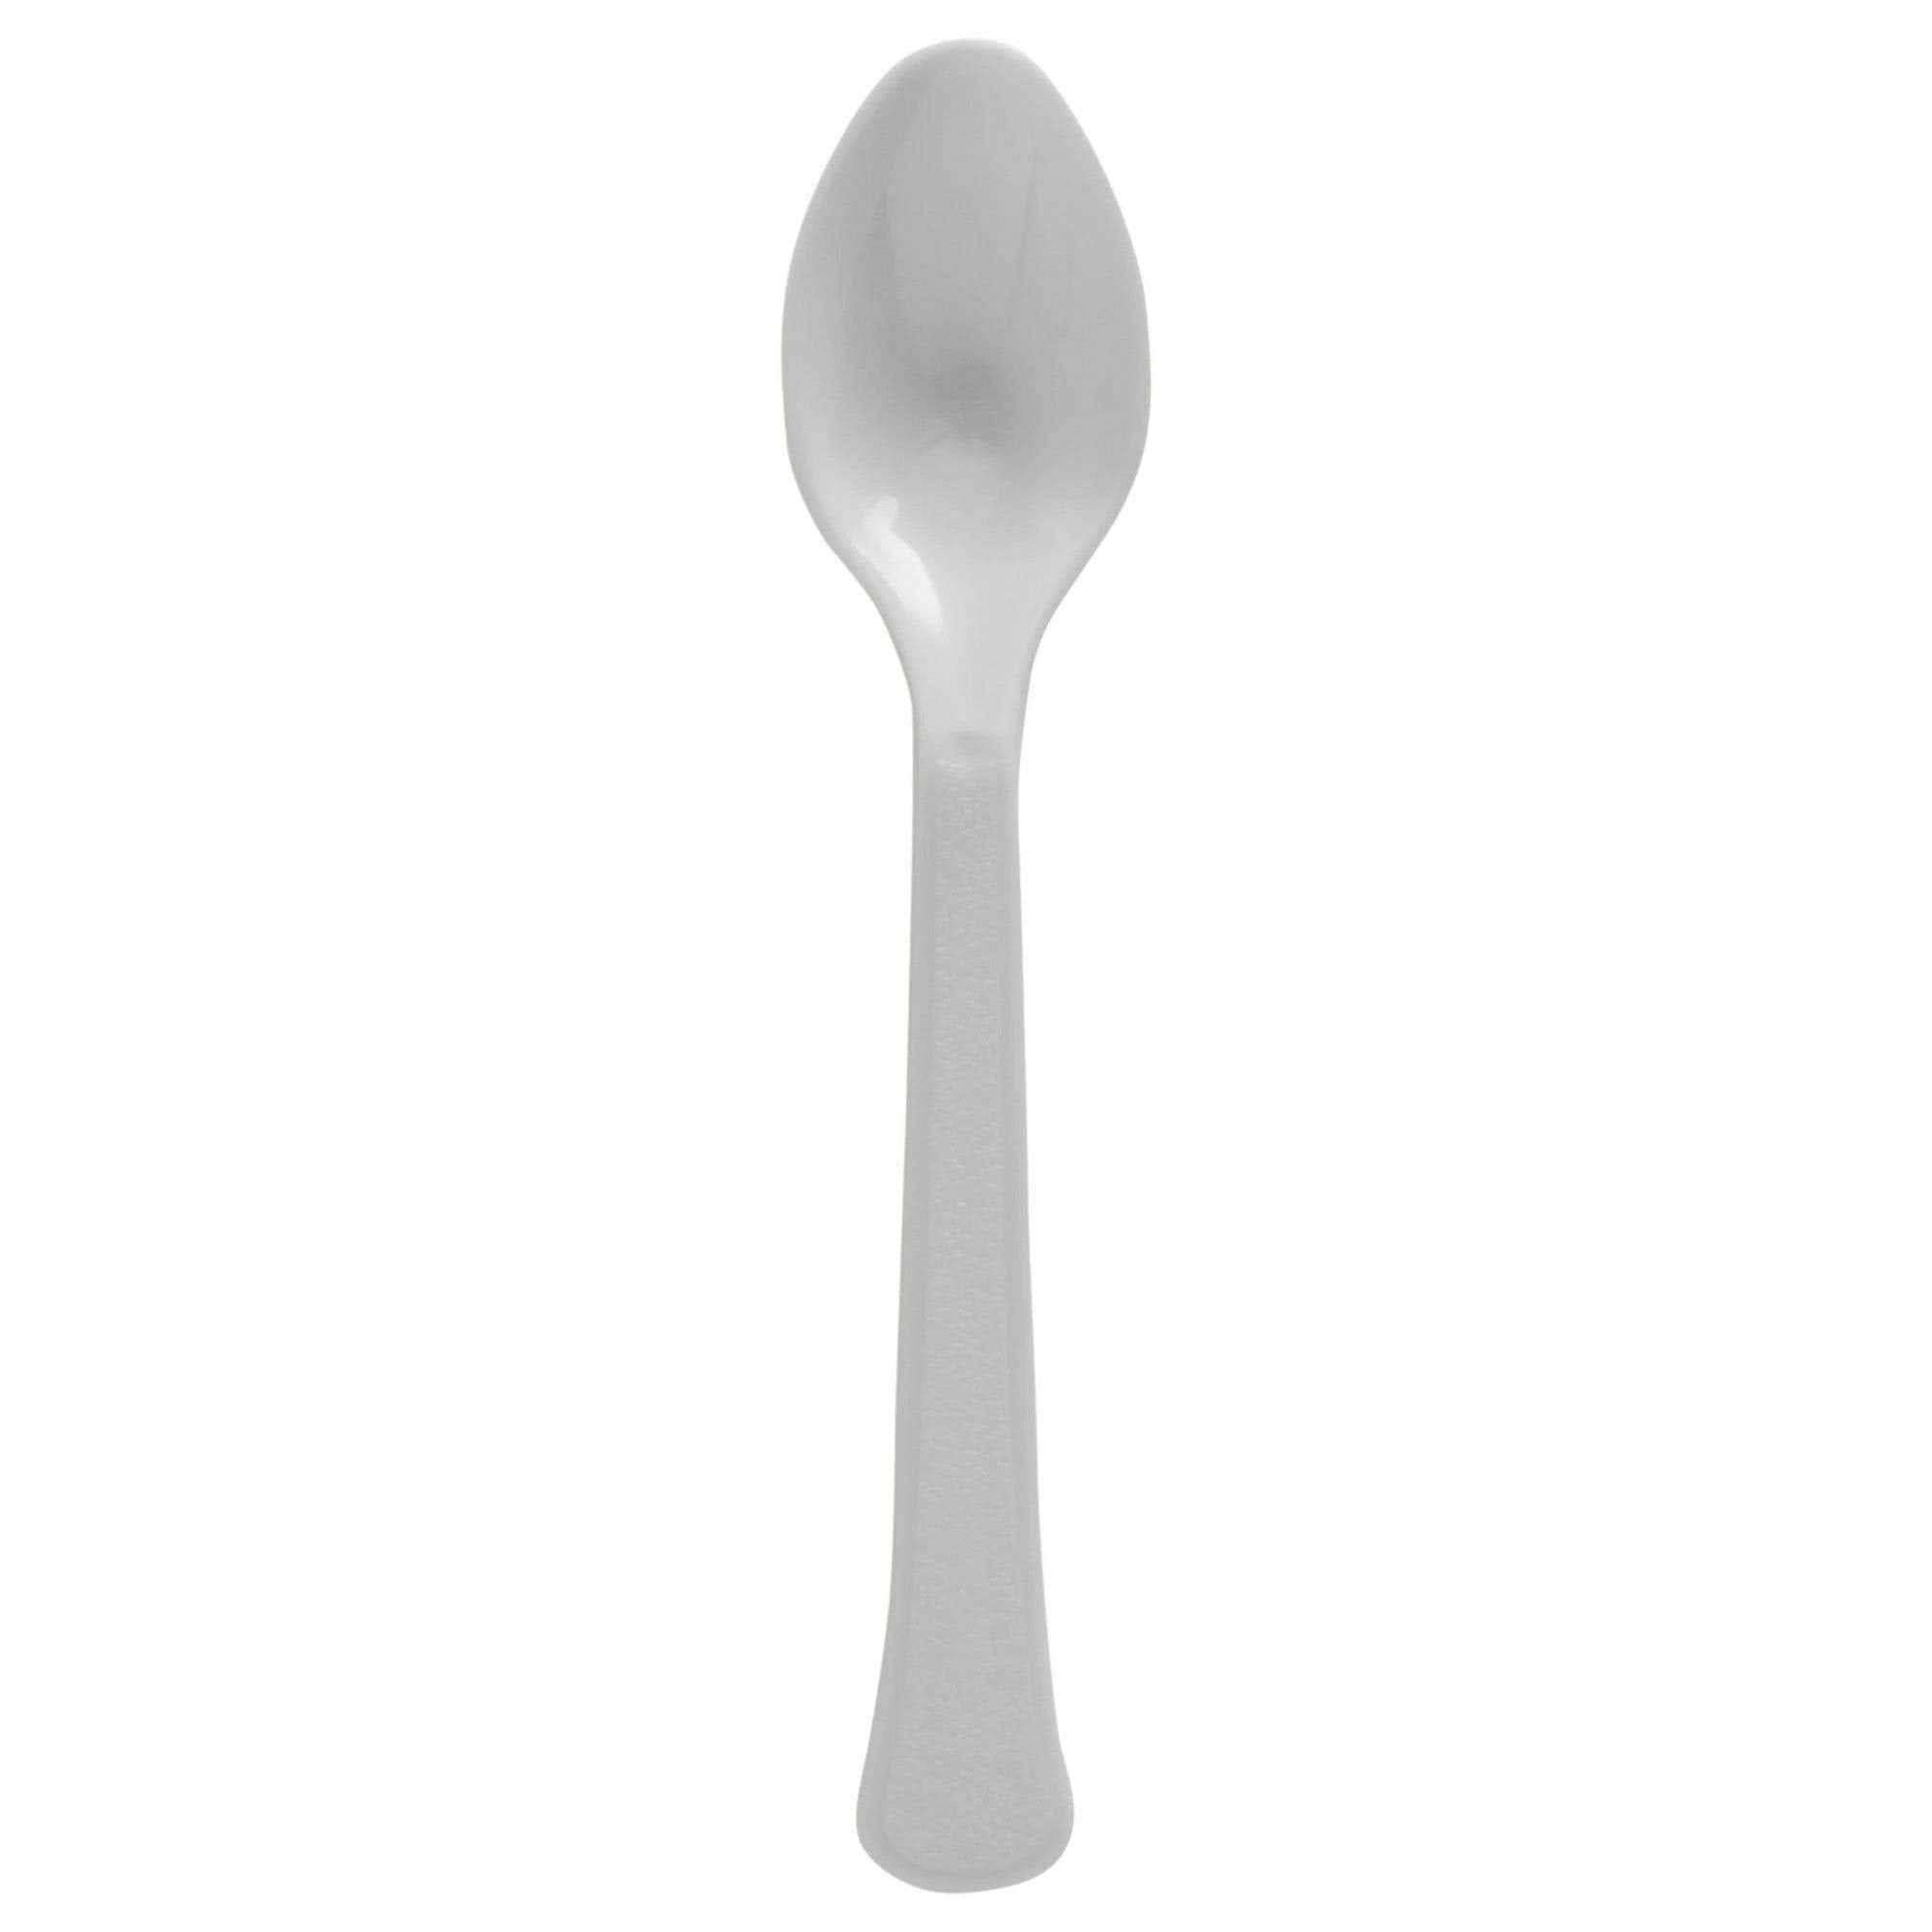 Amscan BASIC Silver - Boxed, Heavy Weight Spoons, 20 Ct.